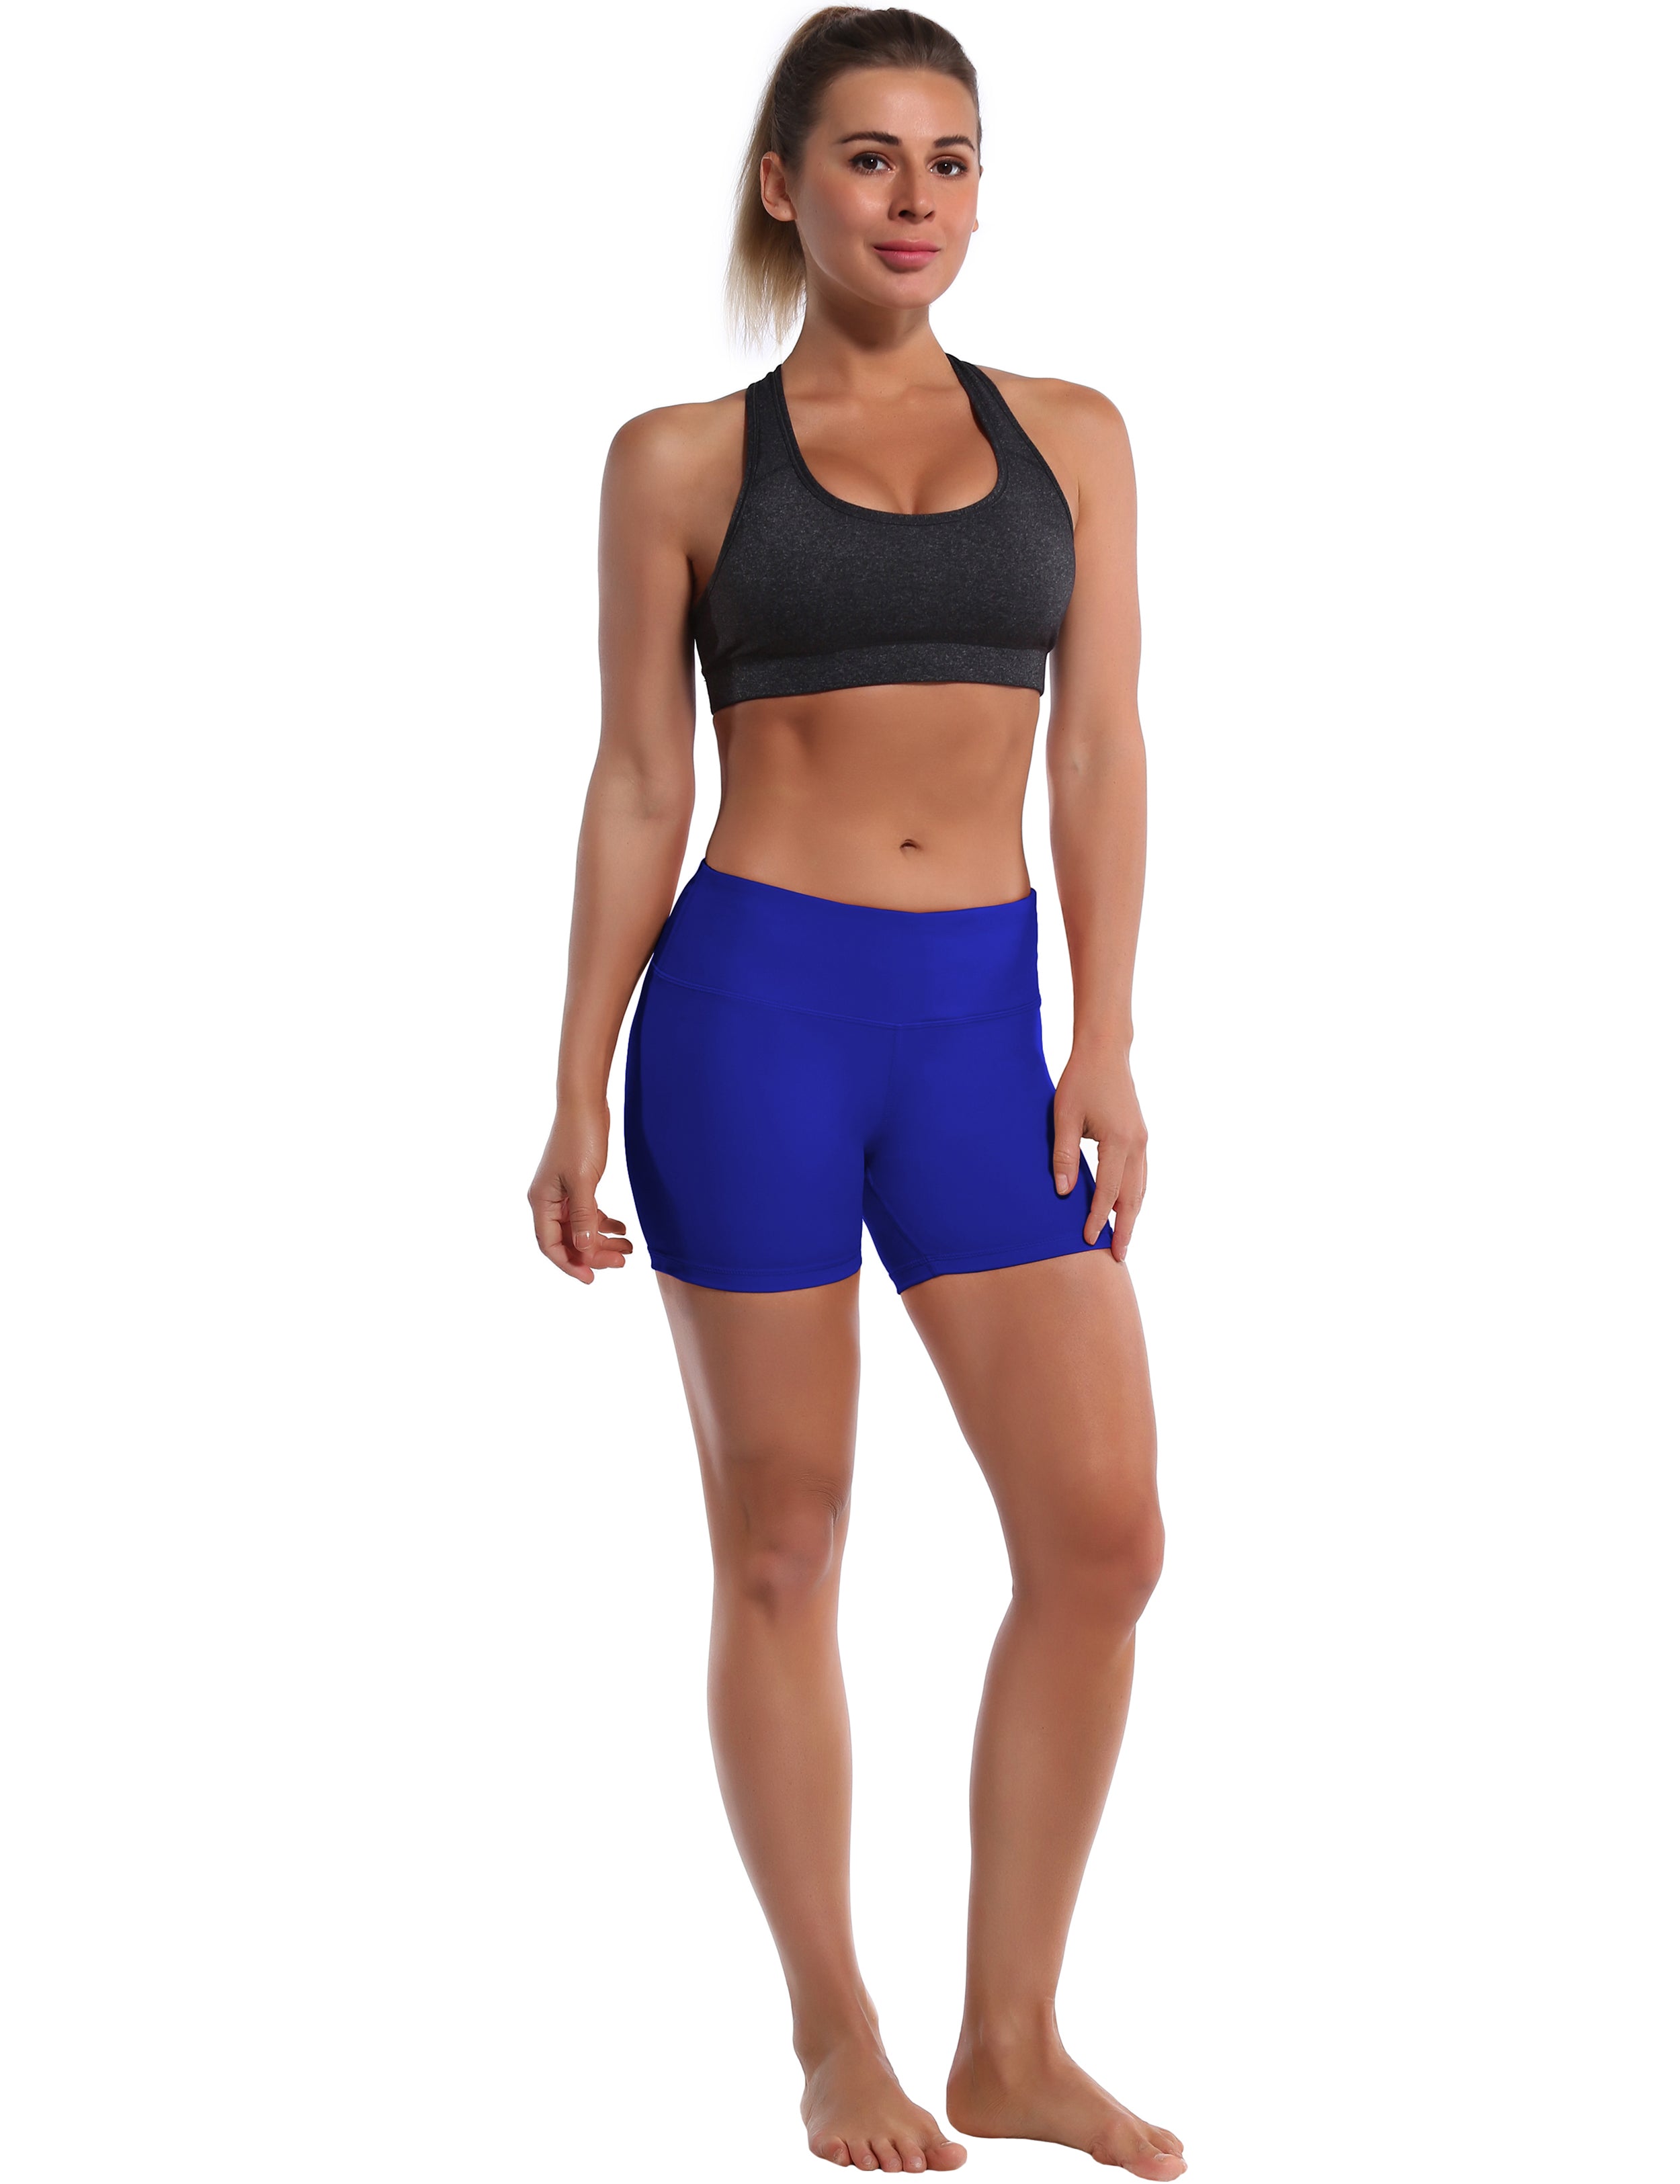 4" Golf Shorts navy Sleek, soft, smooth and totally comfortable: our newest style is here. Softest-ever fabric High elasticity High density 4-way stretch Fabric doesn't attract lint easily No see-through Moisture-wicking Machine wash 75% Nylon, 25% Spandex